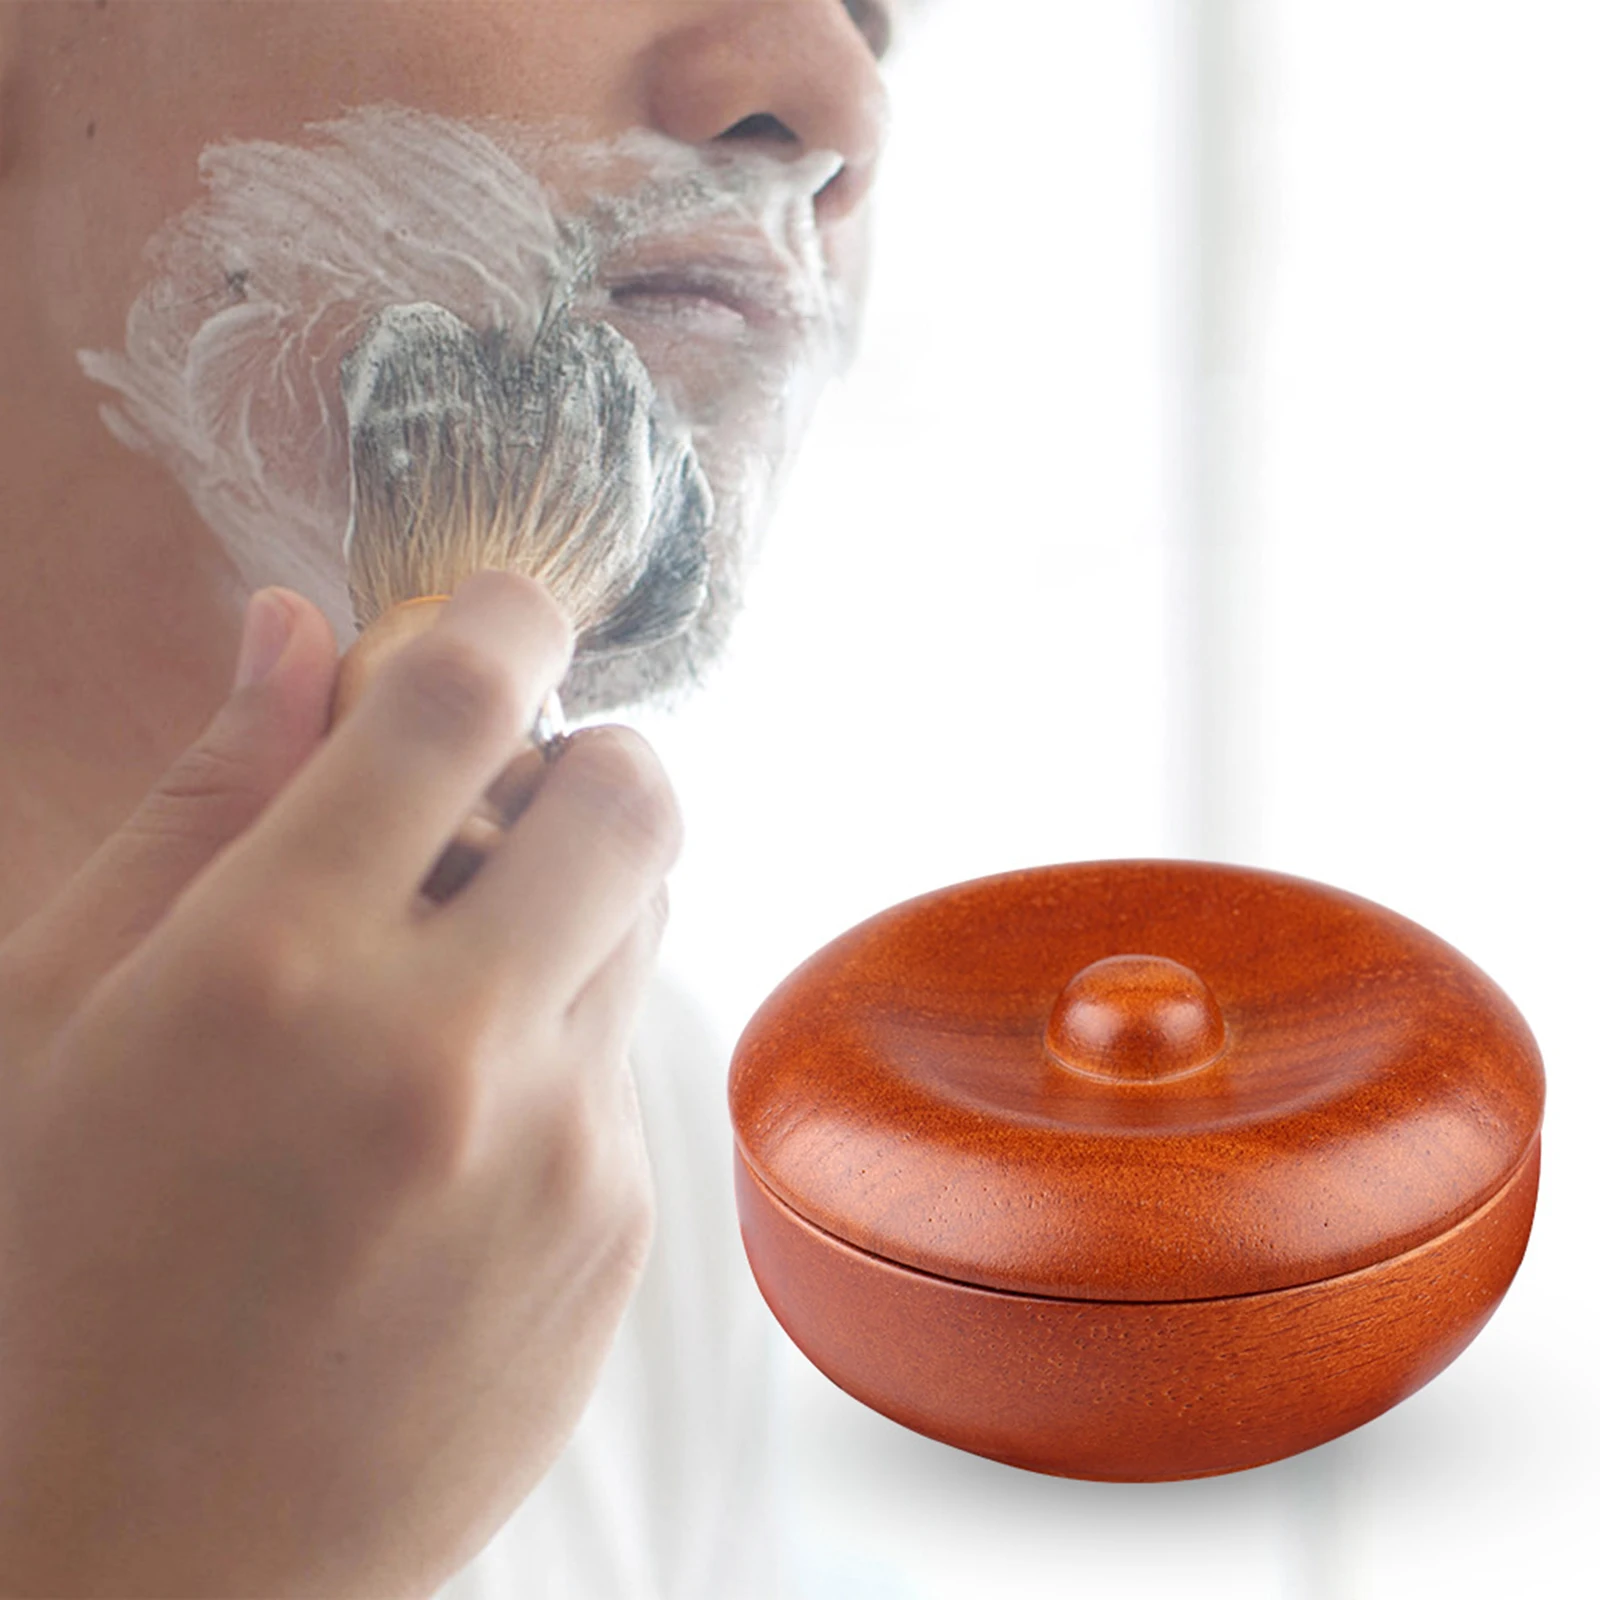 Wooden Shaving Soap Bowl with Cover Lathering Shave Soap Face Cleaning